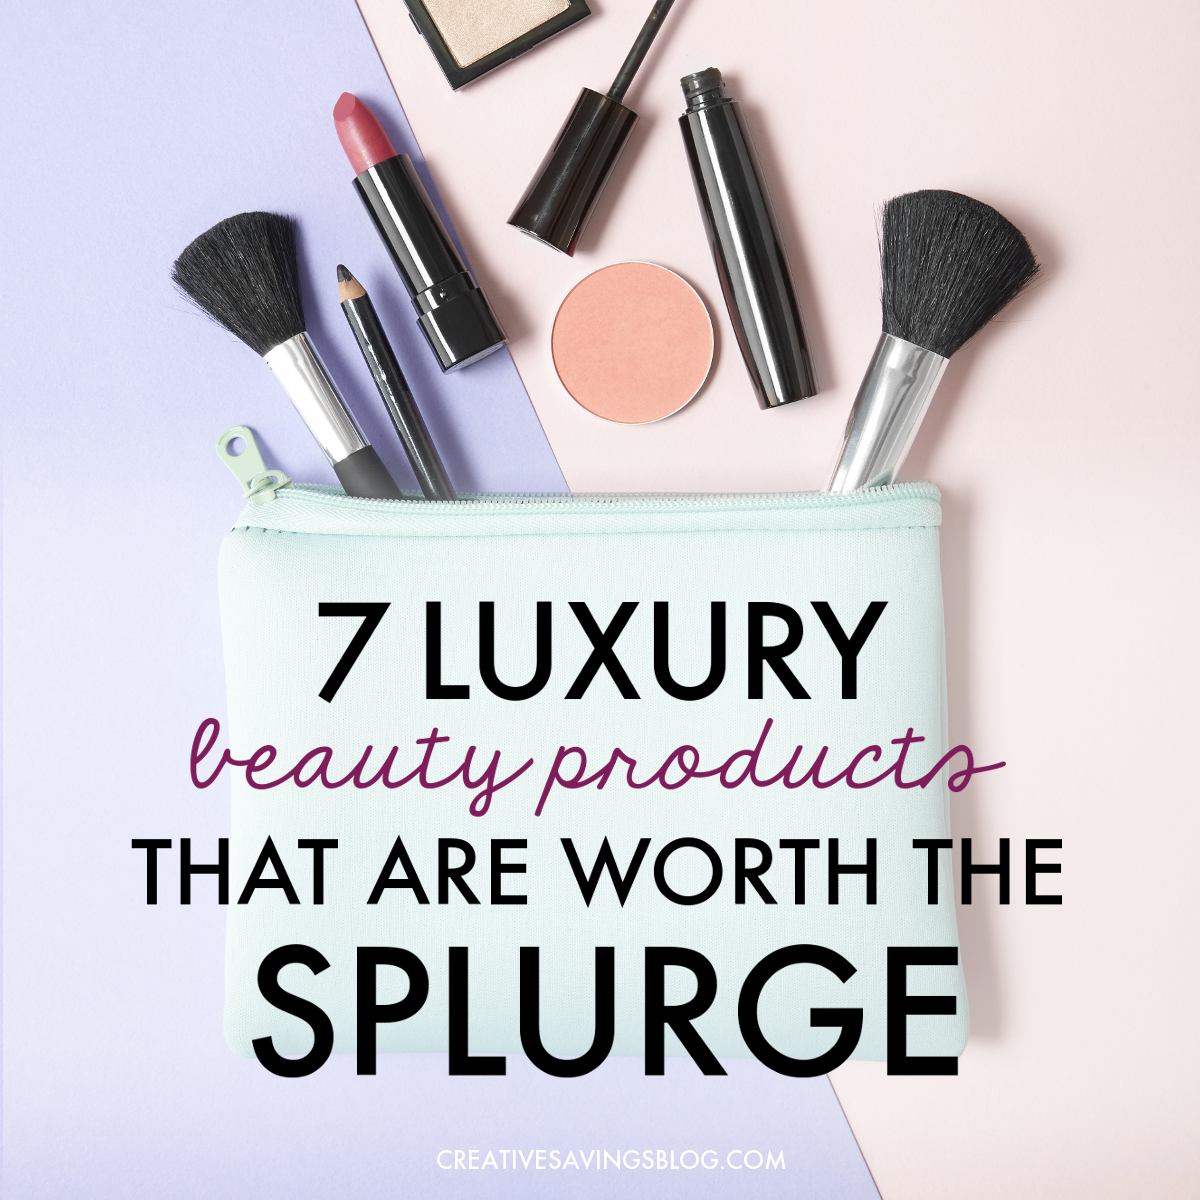 7 Luxury Beauty Products that are Worth the Splurge